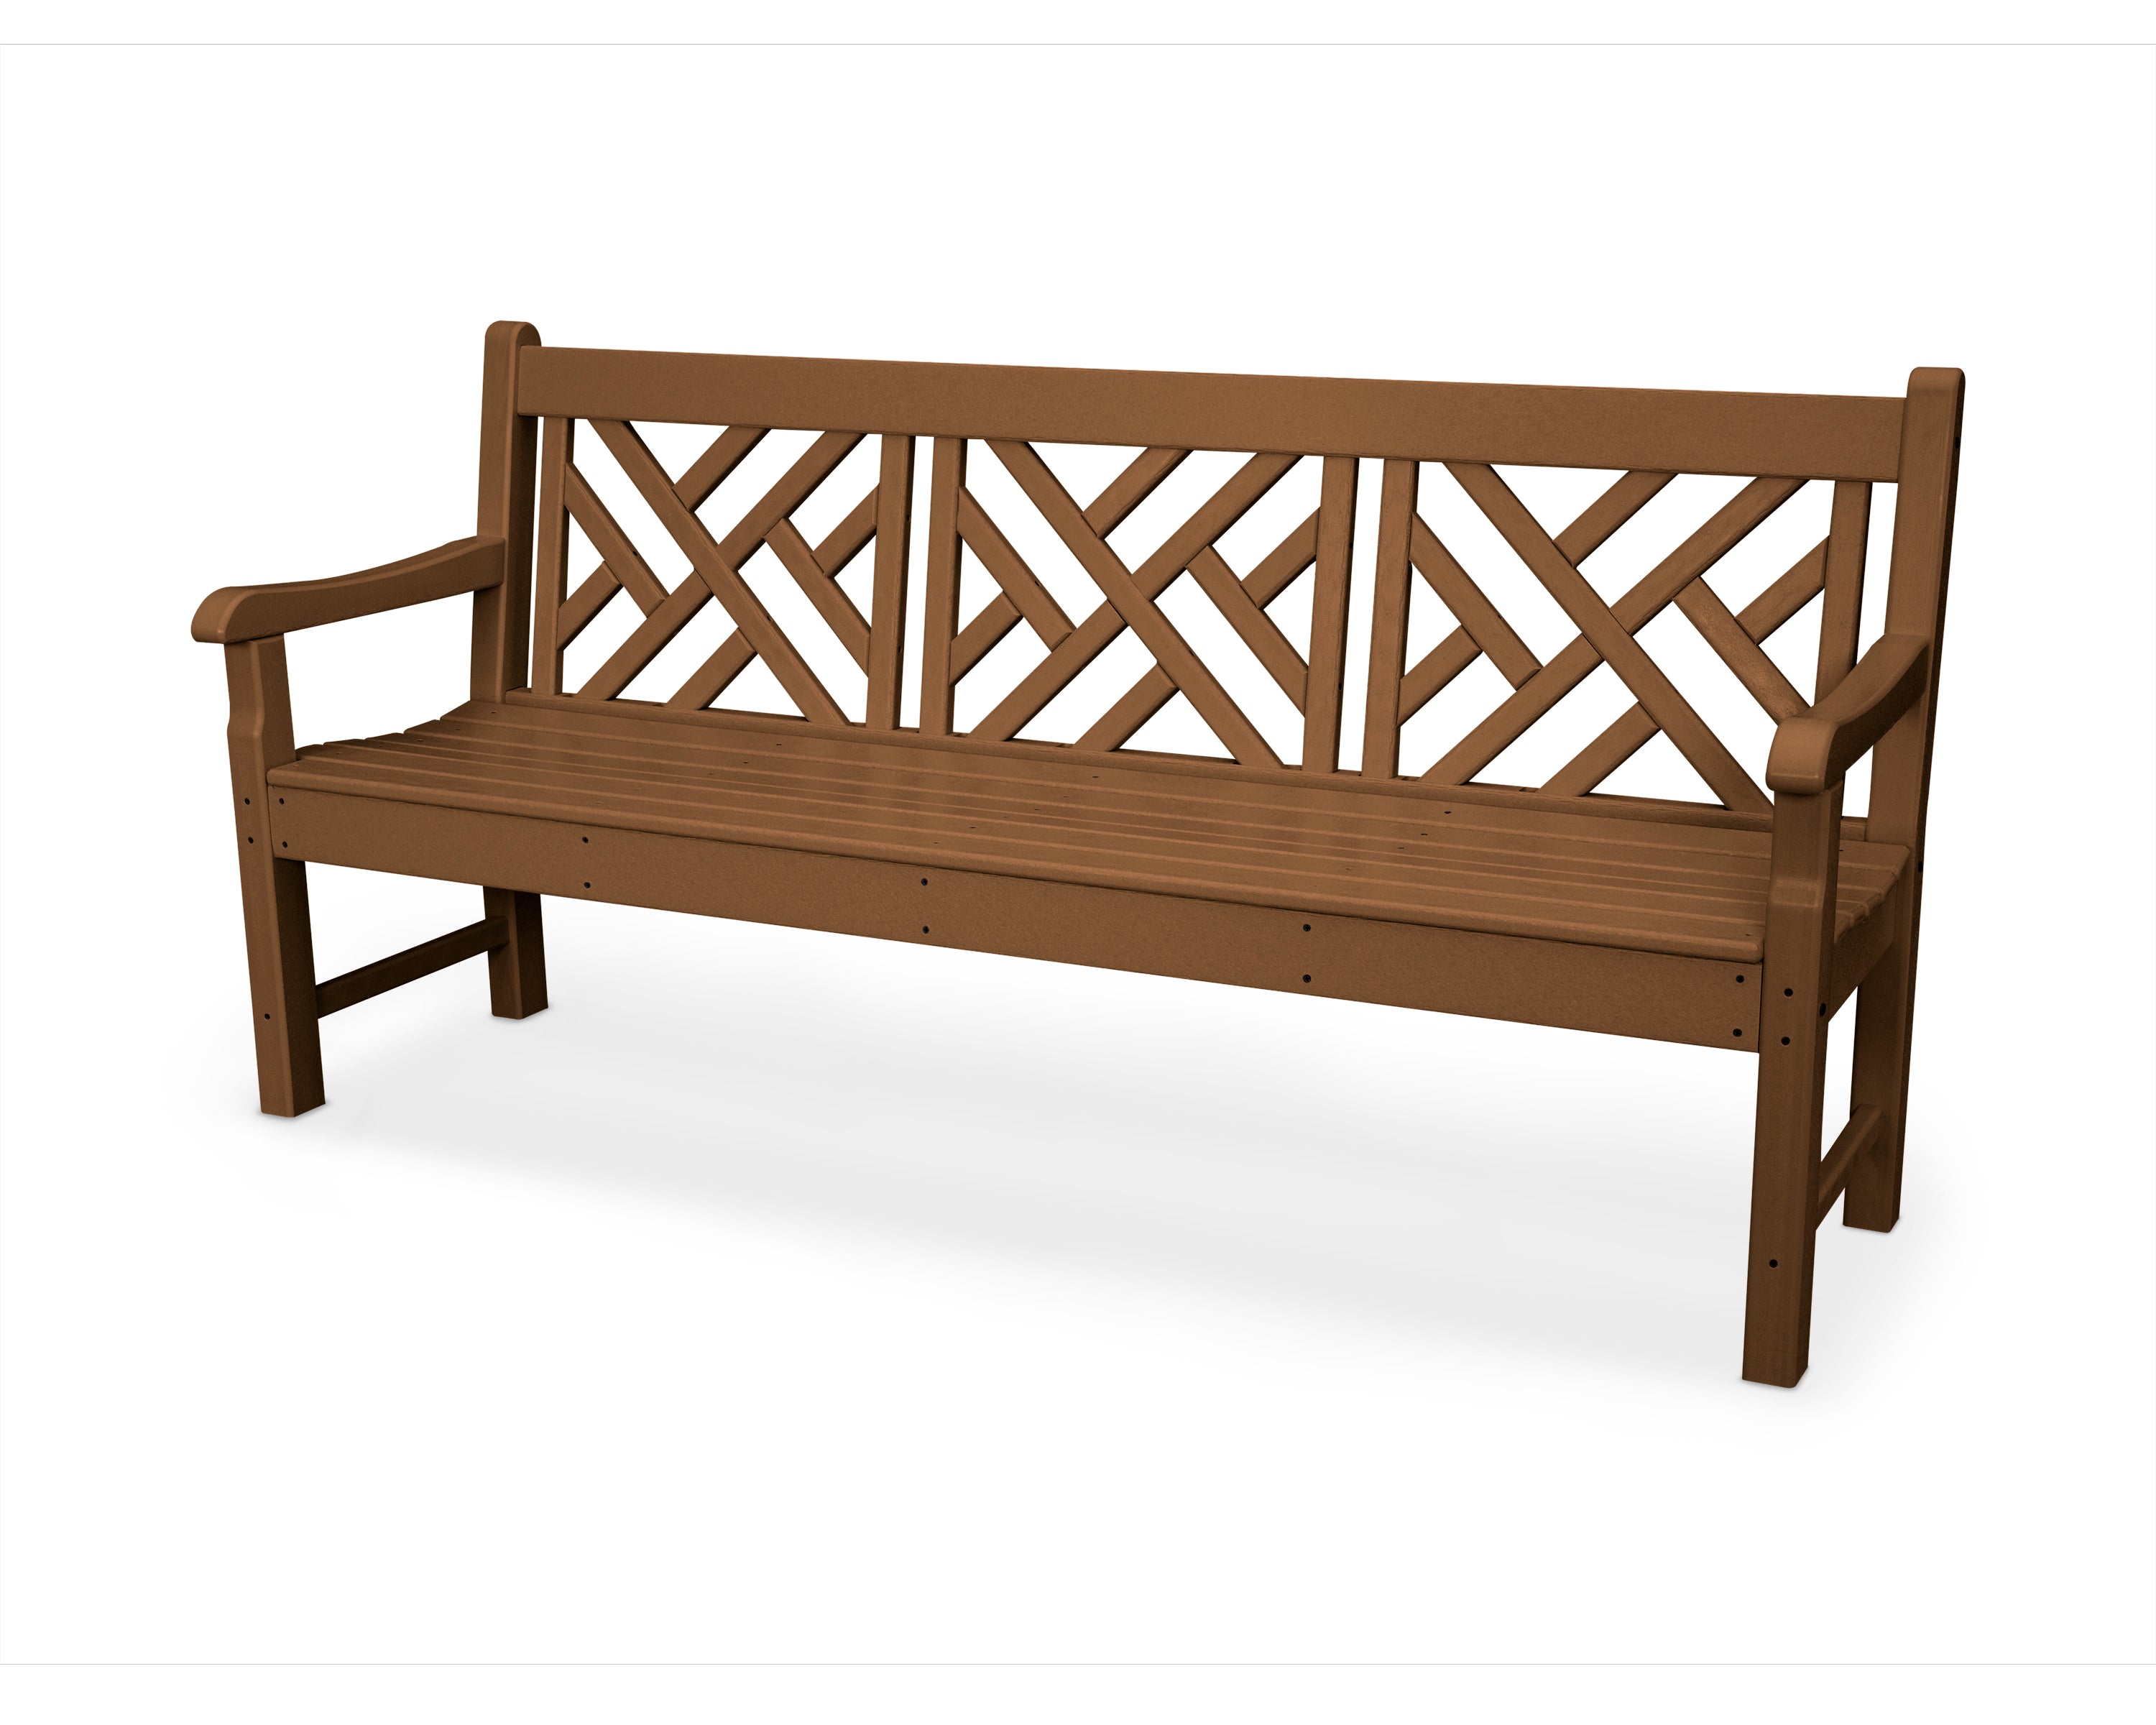 POLYWOOD® Rockford 72" Chippendale Bench in Teak